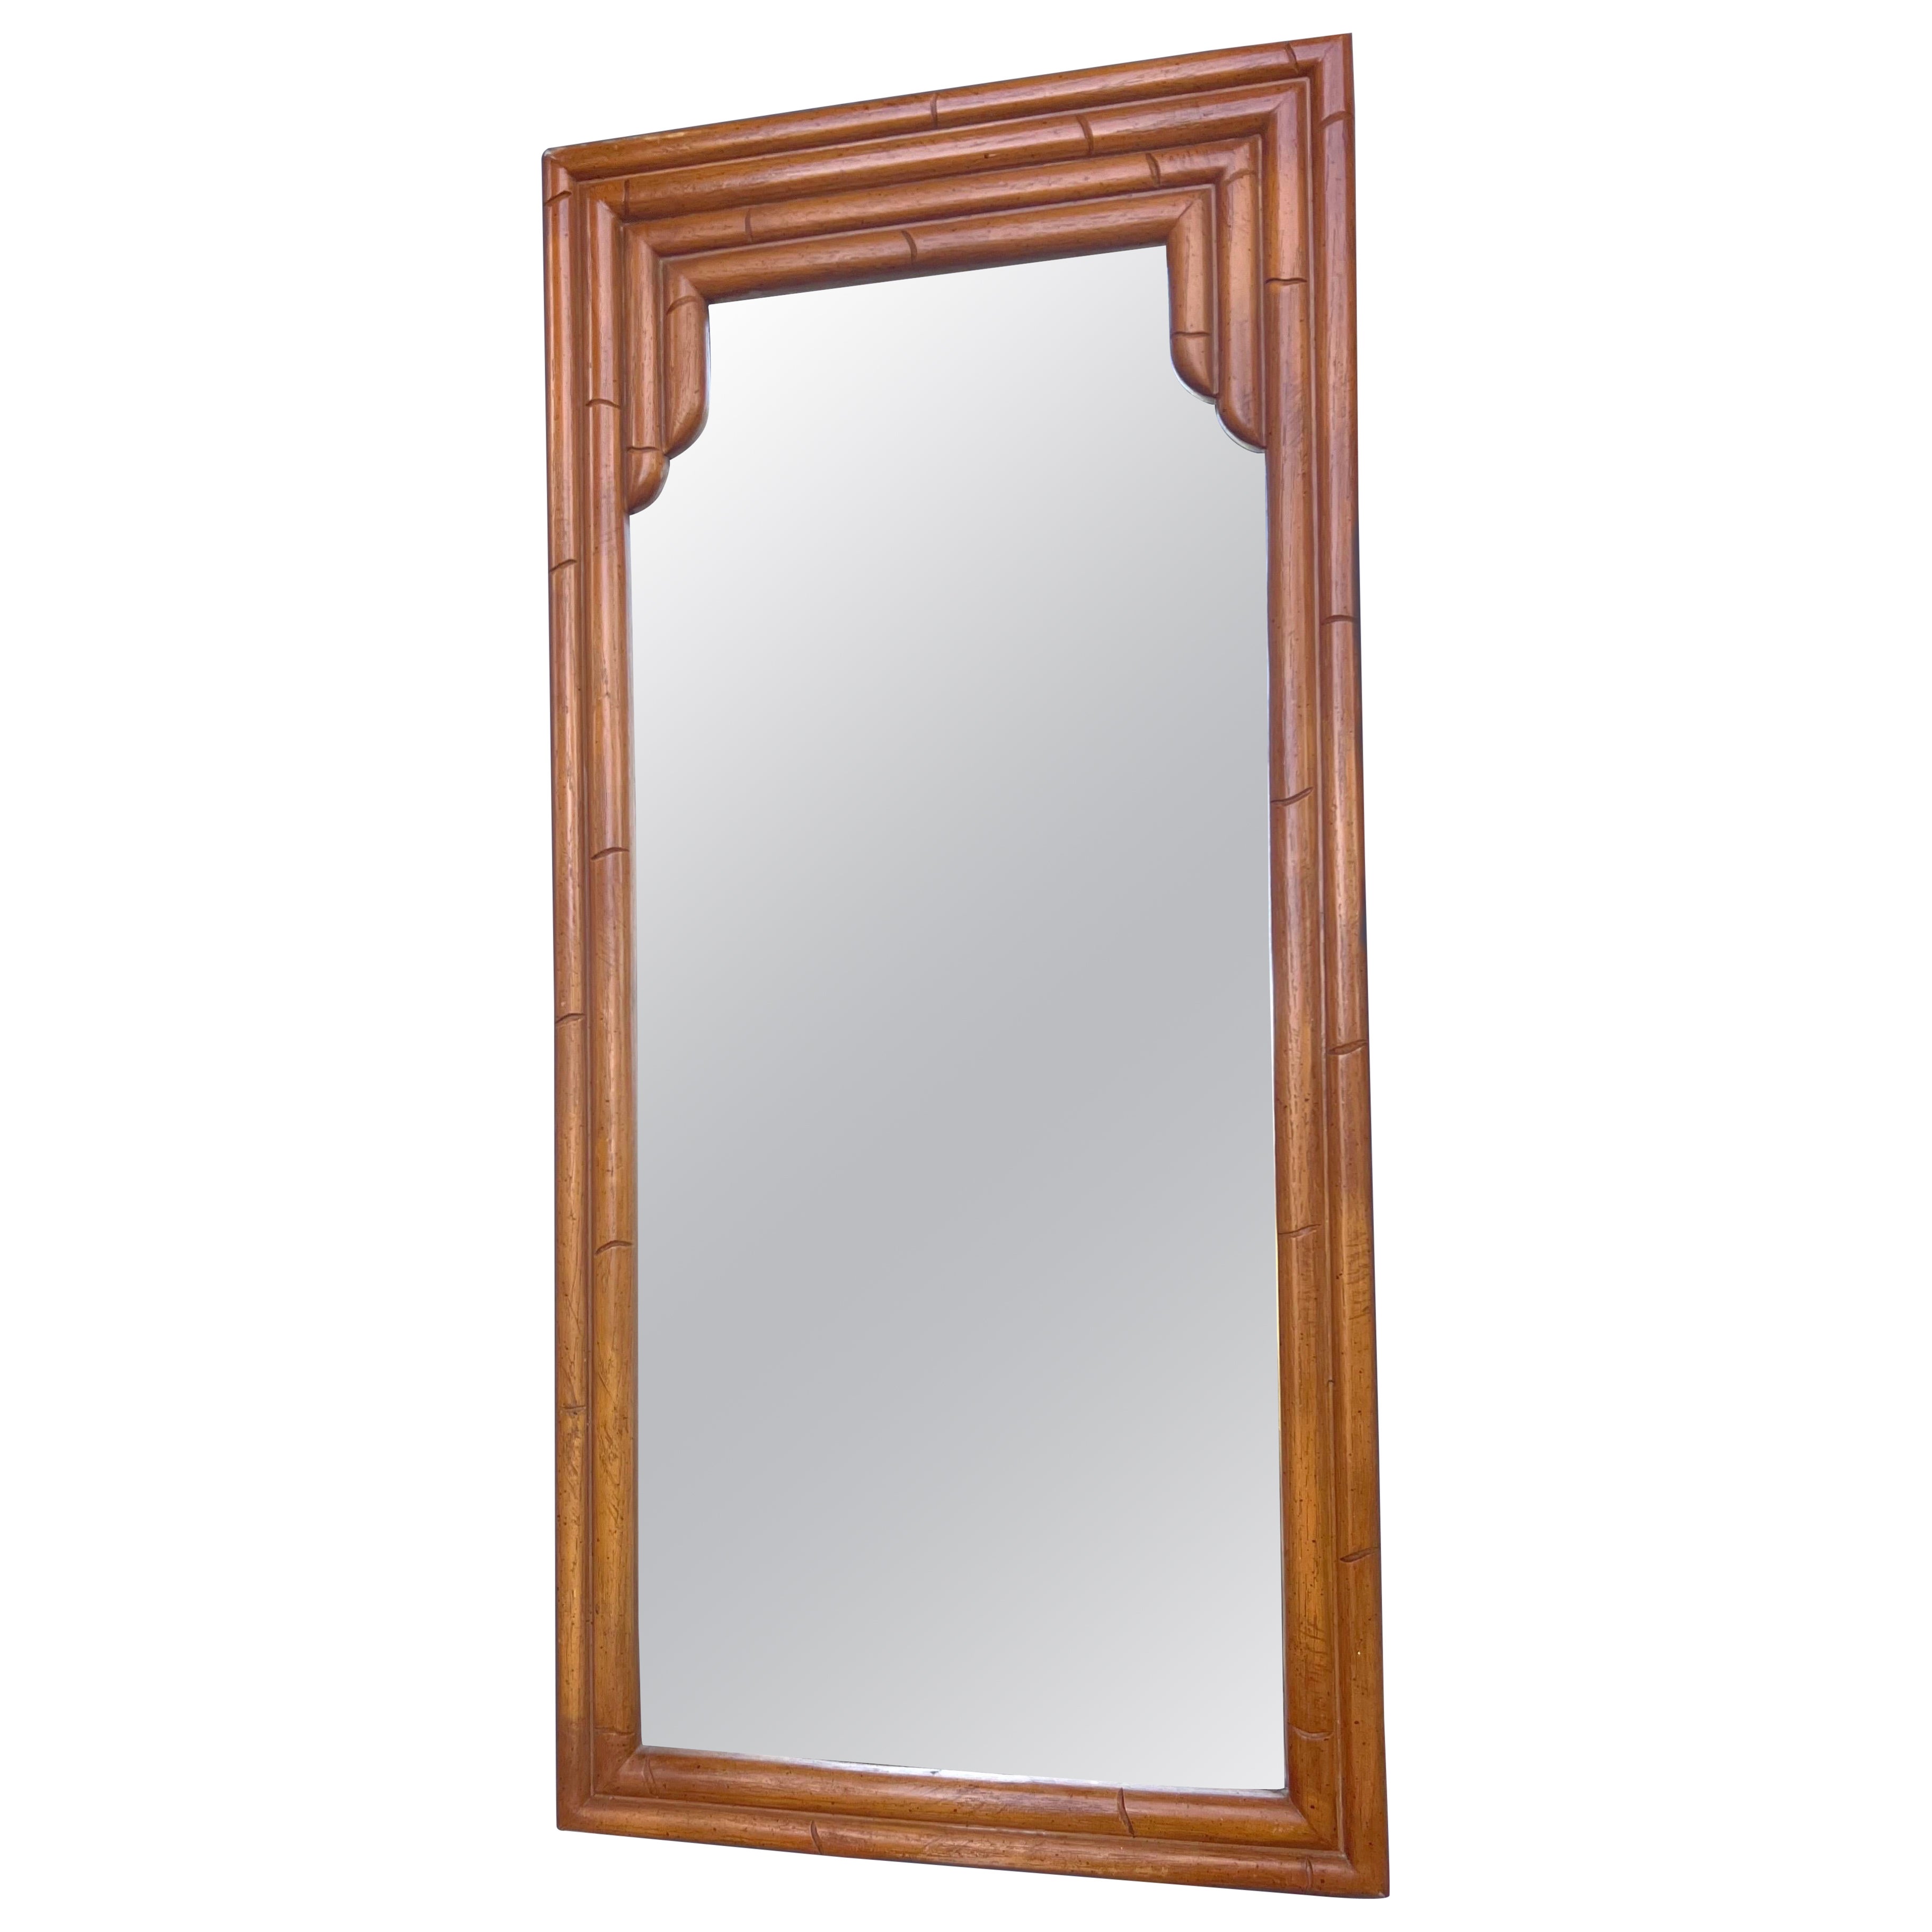 1970s Vintage Faux Bamboo Mirror in Natural Color